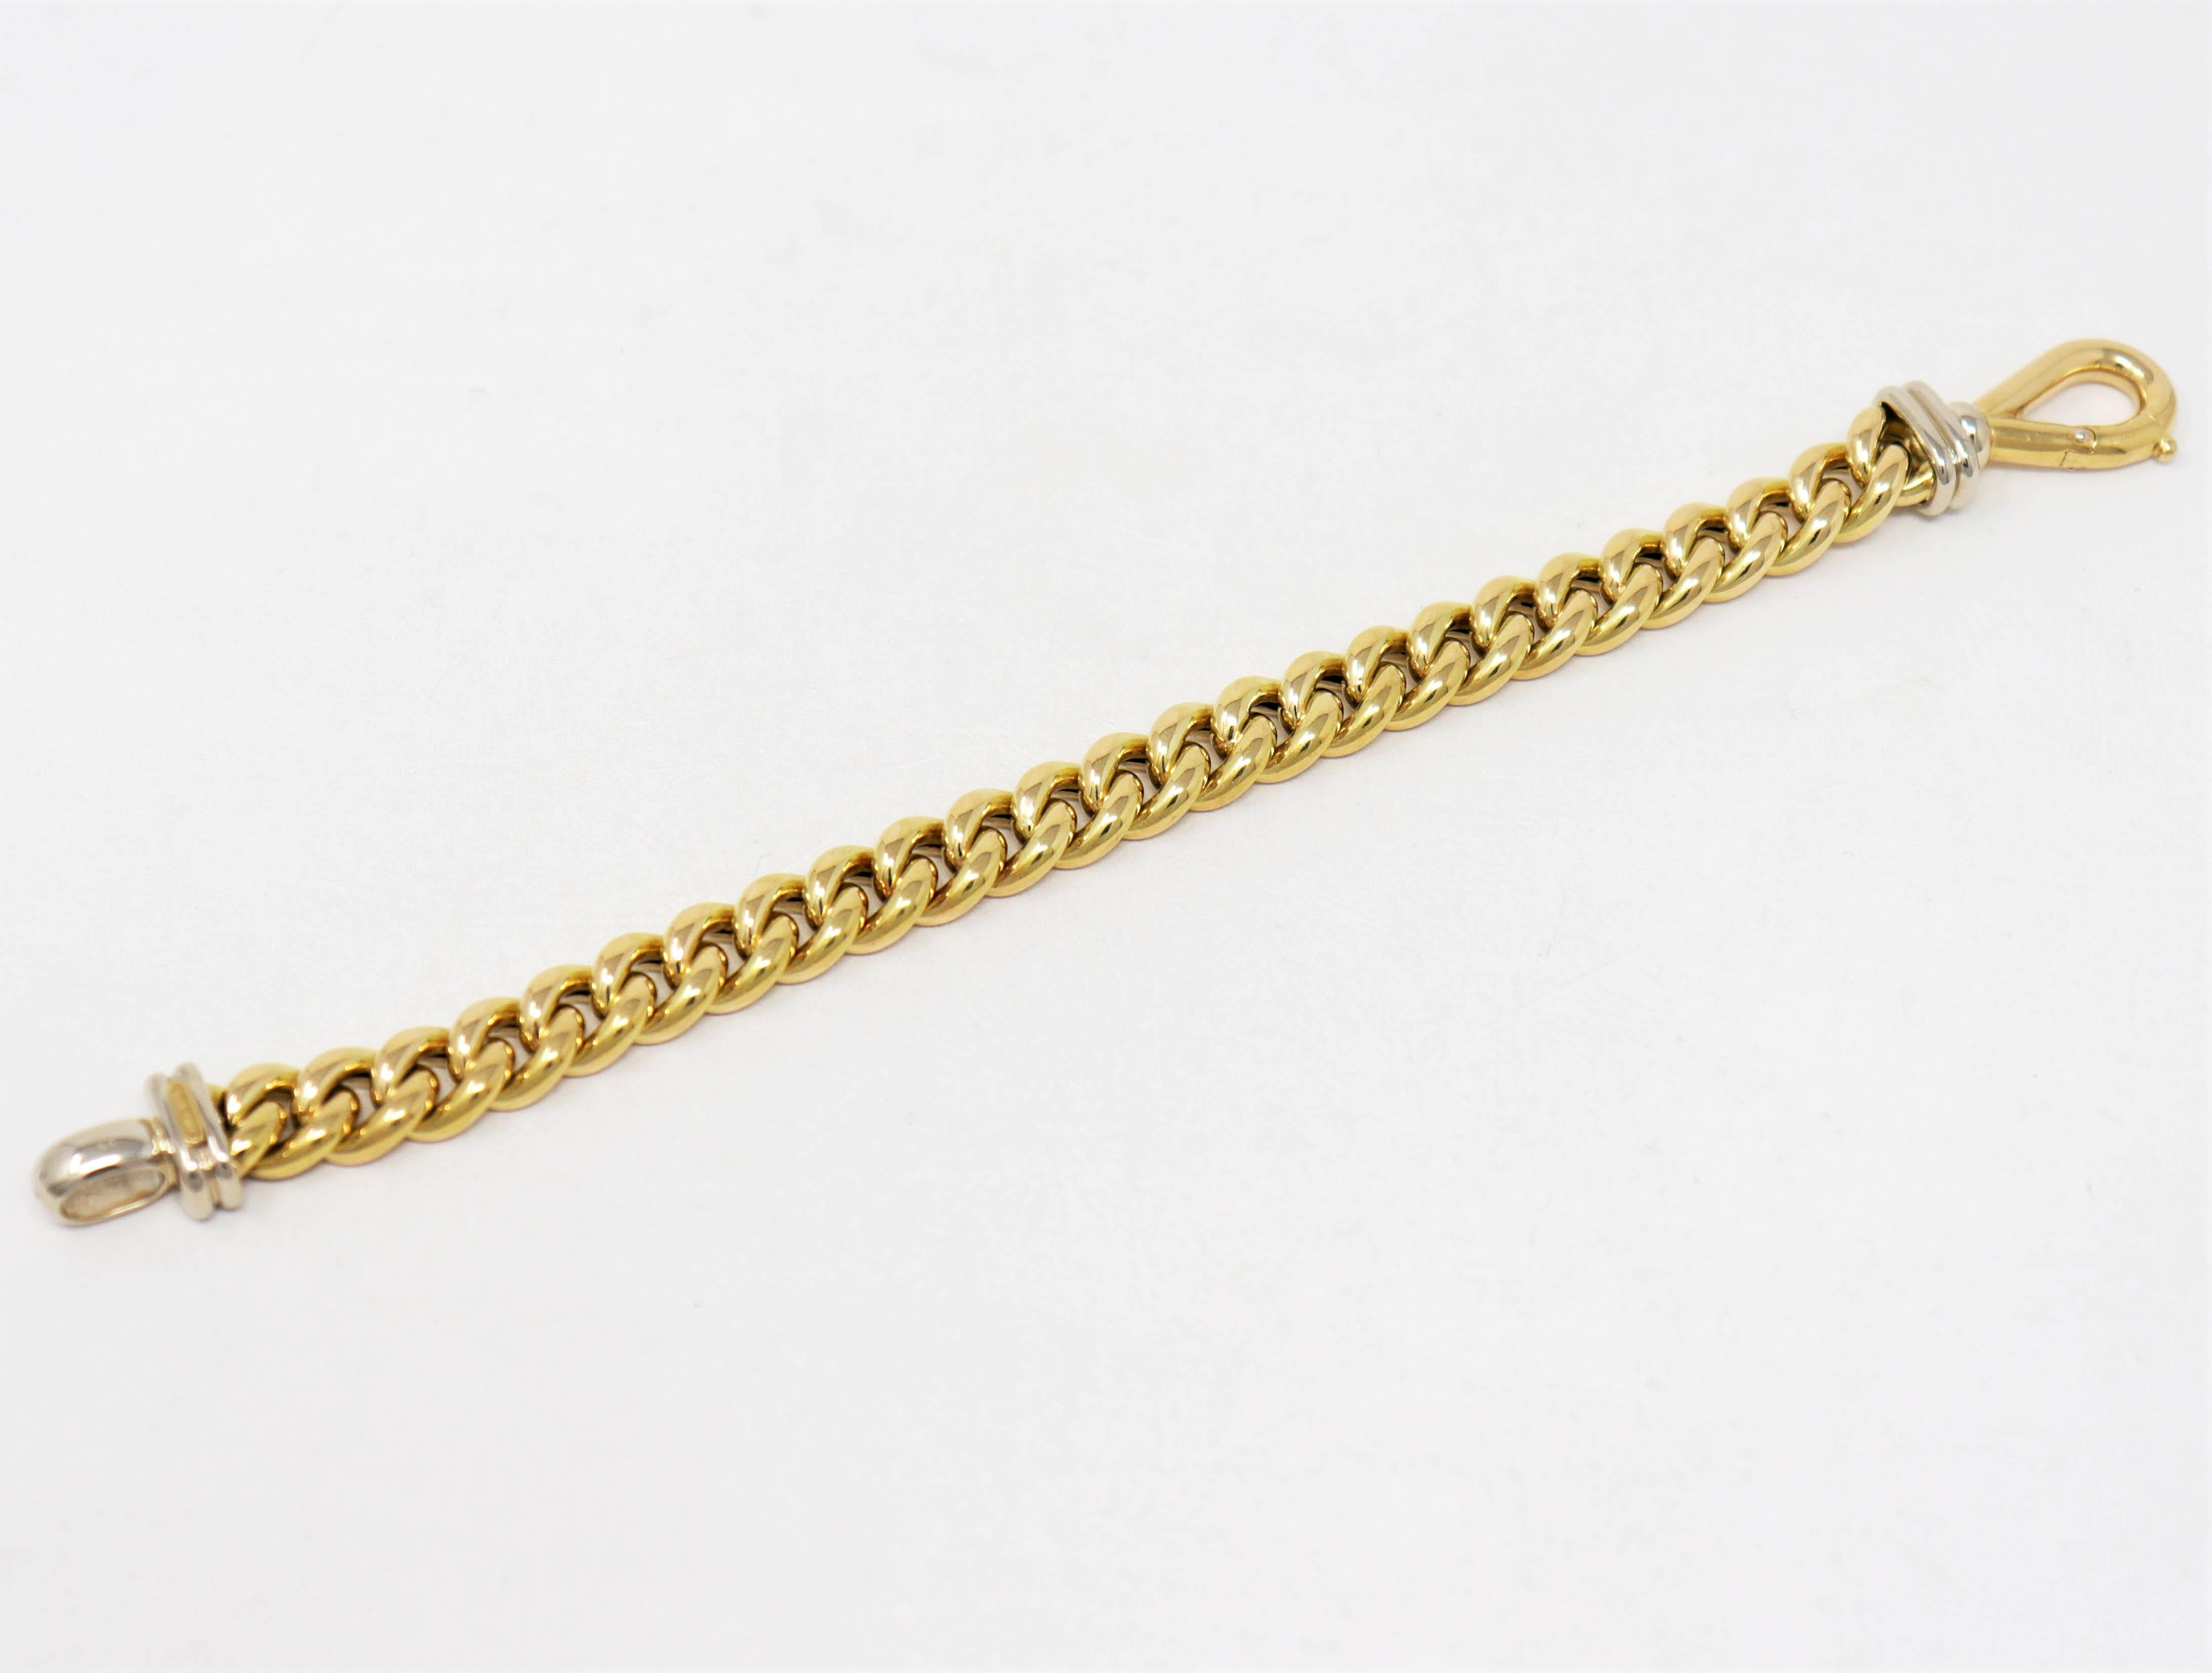 Signoretti Polished 18 Karat Yellow and White Gold Curb Chain Link Bracelet 4